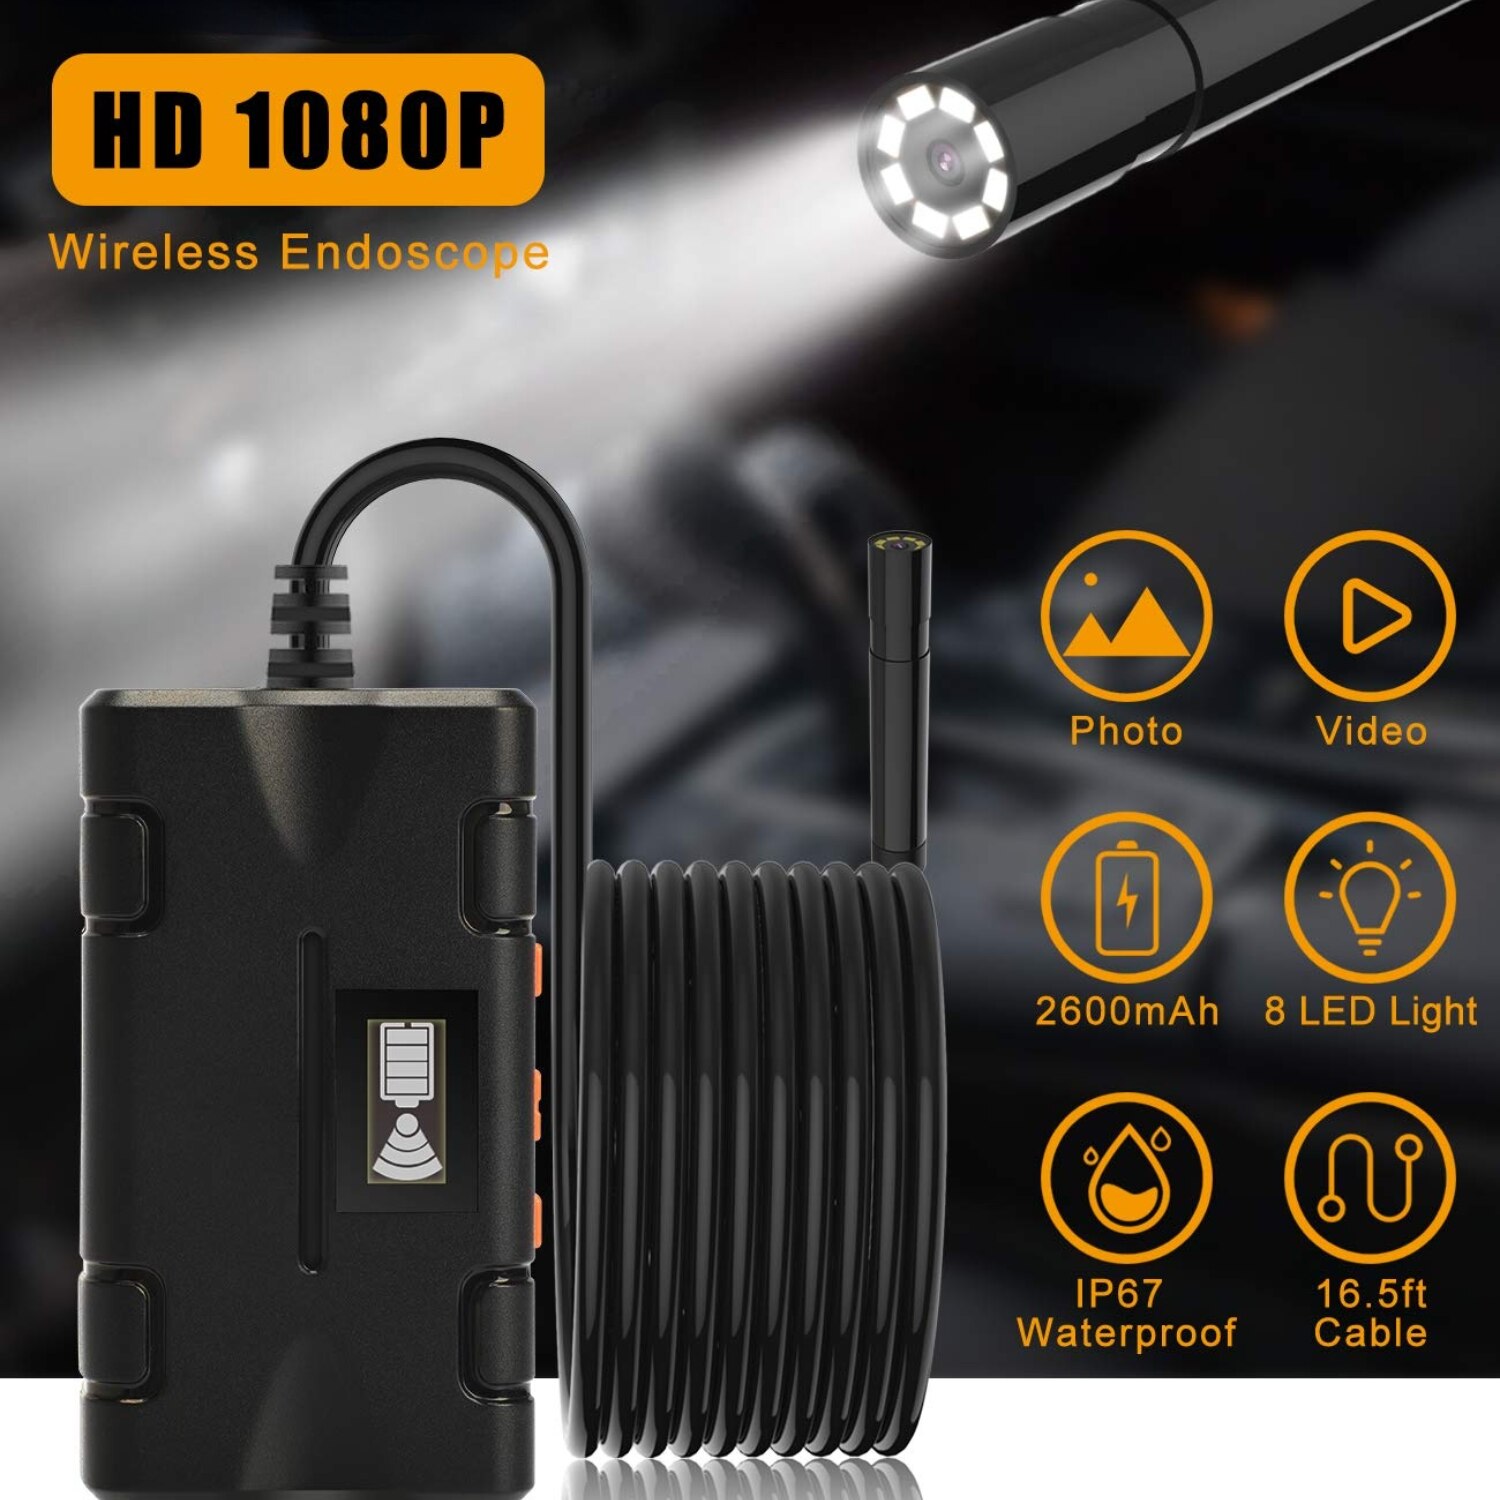 HD 1080P Waterproof Smart WIFI Endoscope 8mm Inspection Snake Camera Borescope Video Camera with 2600mAh Battery for IOS/Android